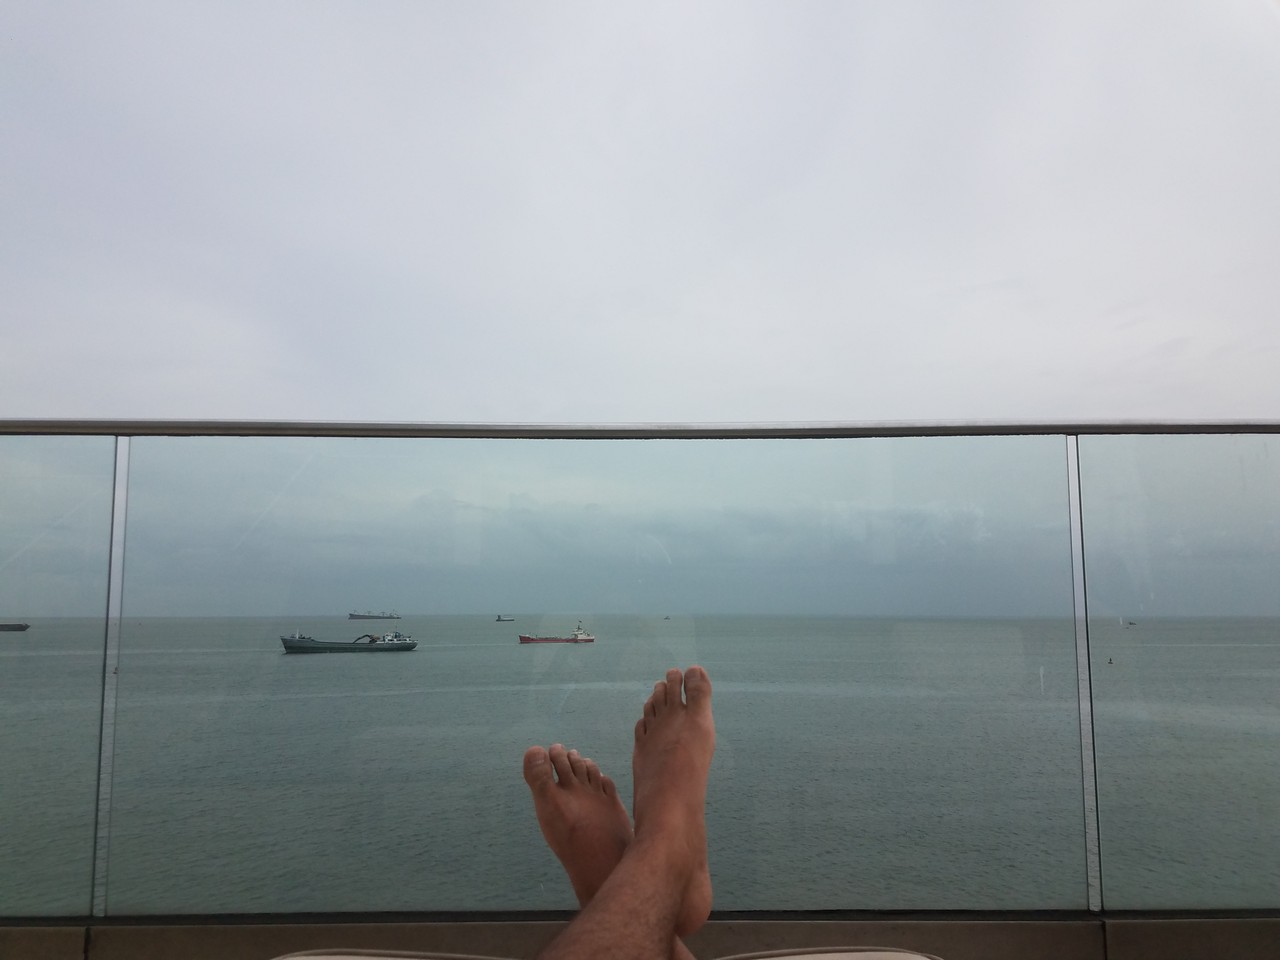 a person's feet on a balcony overlooking water